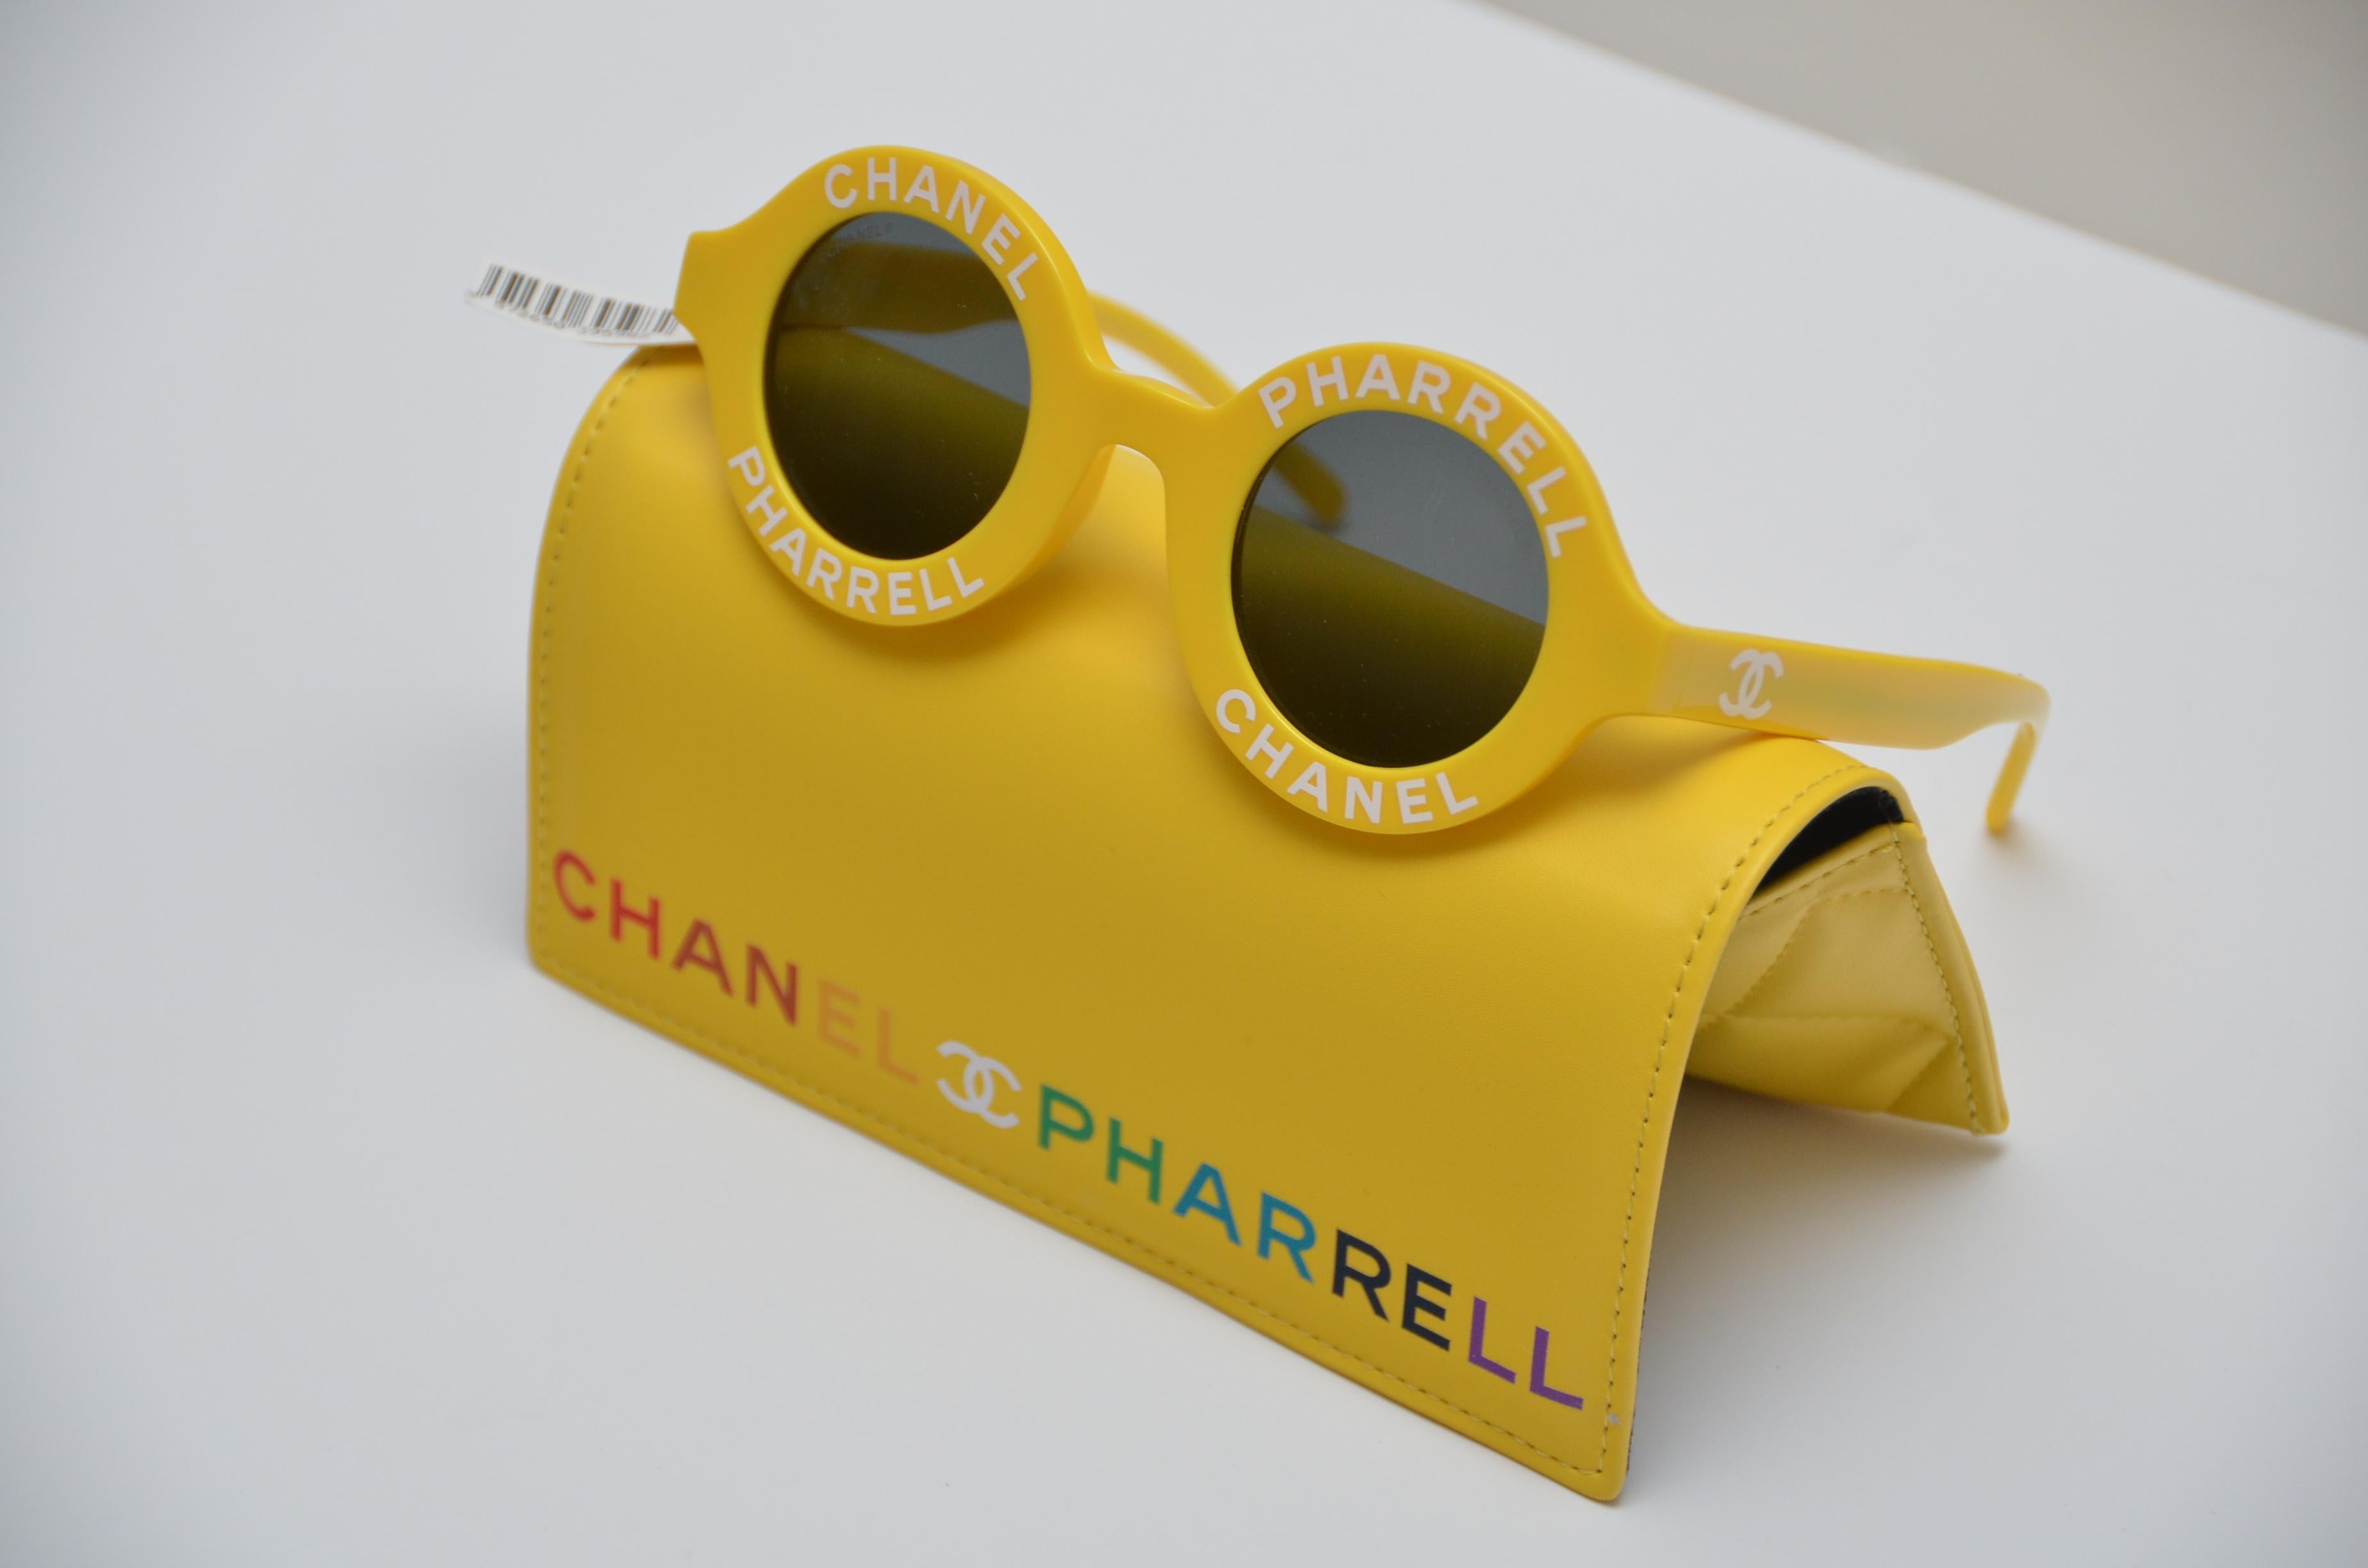 Chanel x Pharrell Capsule Collection Sunglasses .  
An urban capsule collection highlighting Pharrell Williams’ longterm relationship with the House of Chanel and initiated by Karl Lagerfeld .  
Color  Yellow Jaune + Gris 
Please note:due to camera